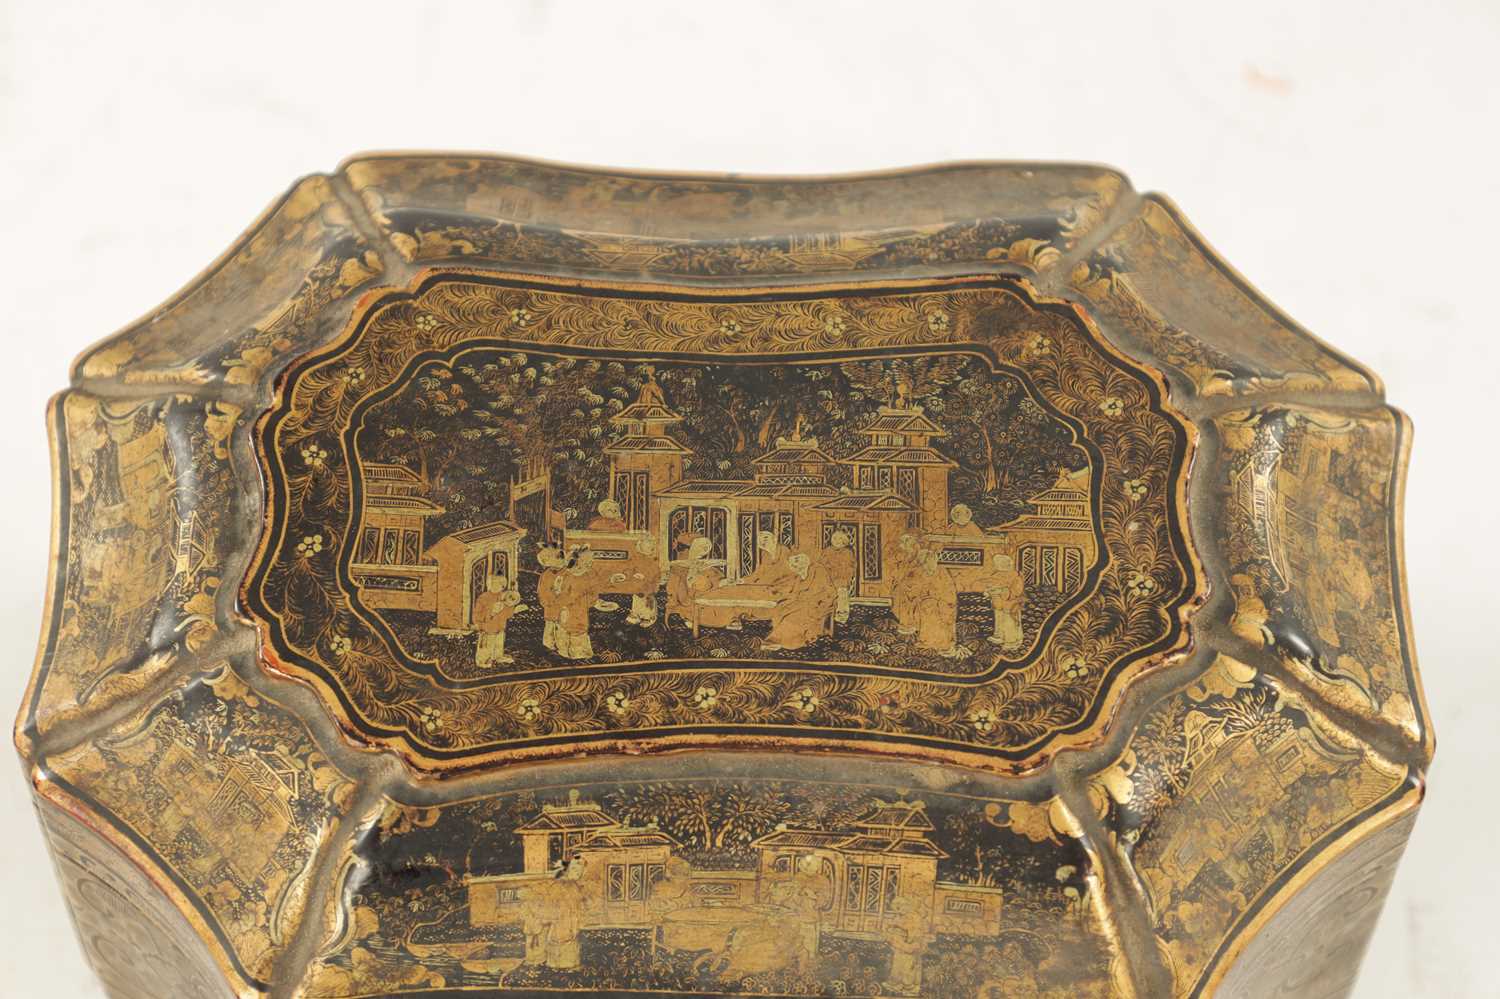 A GOOD 19TH CENTURY CHINESE EXPORT LACQUER WORK TEA CADDY - Image 4 of 13